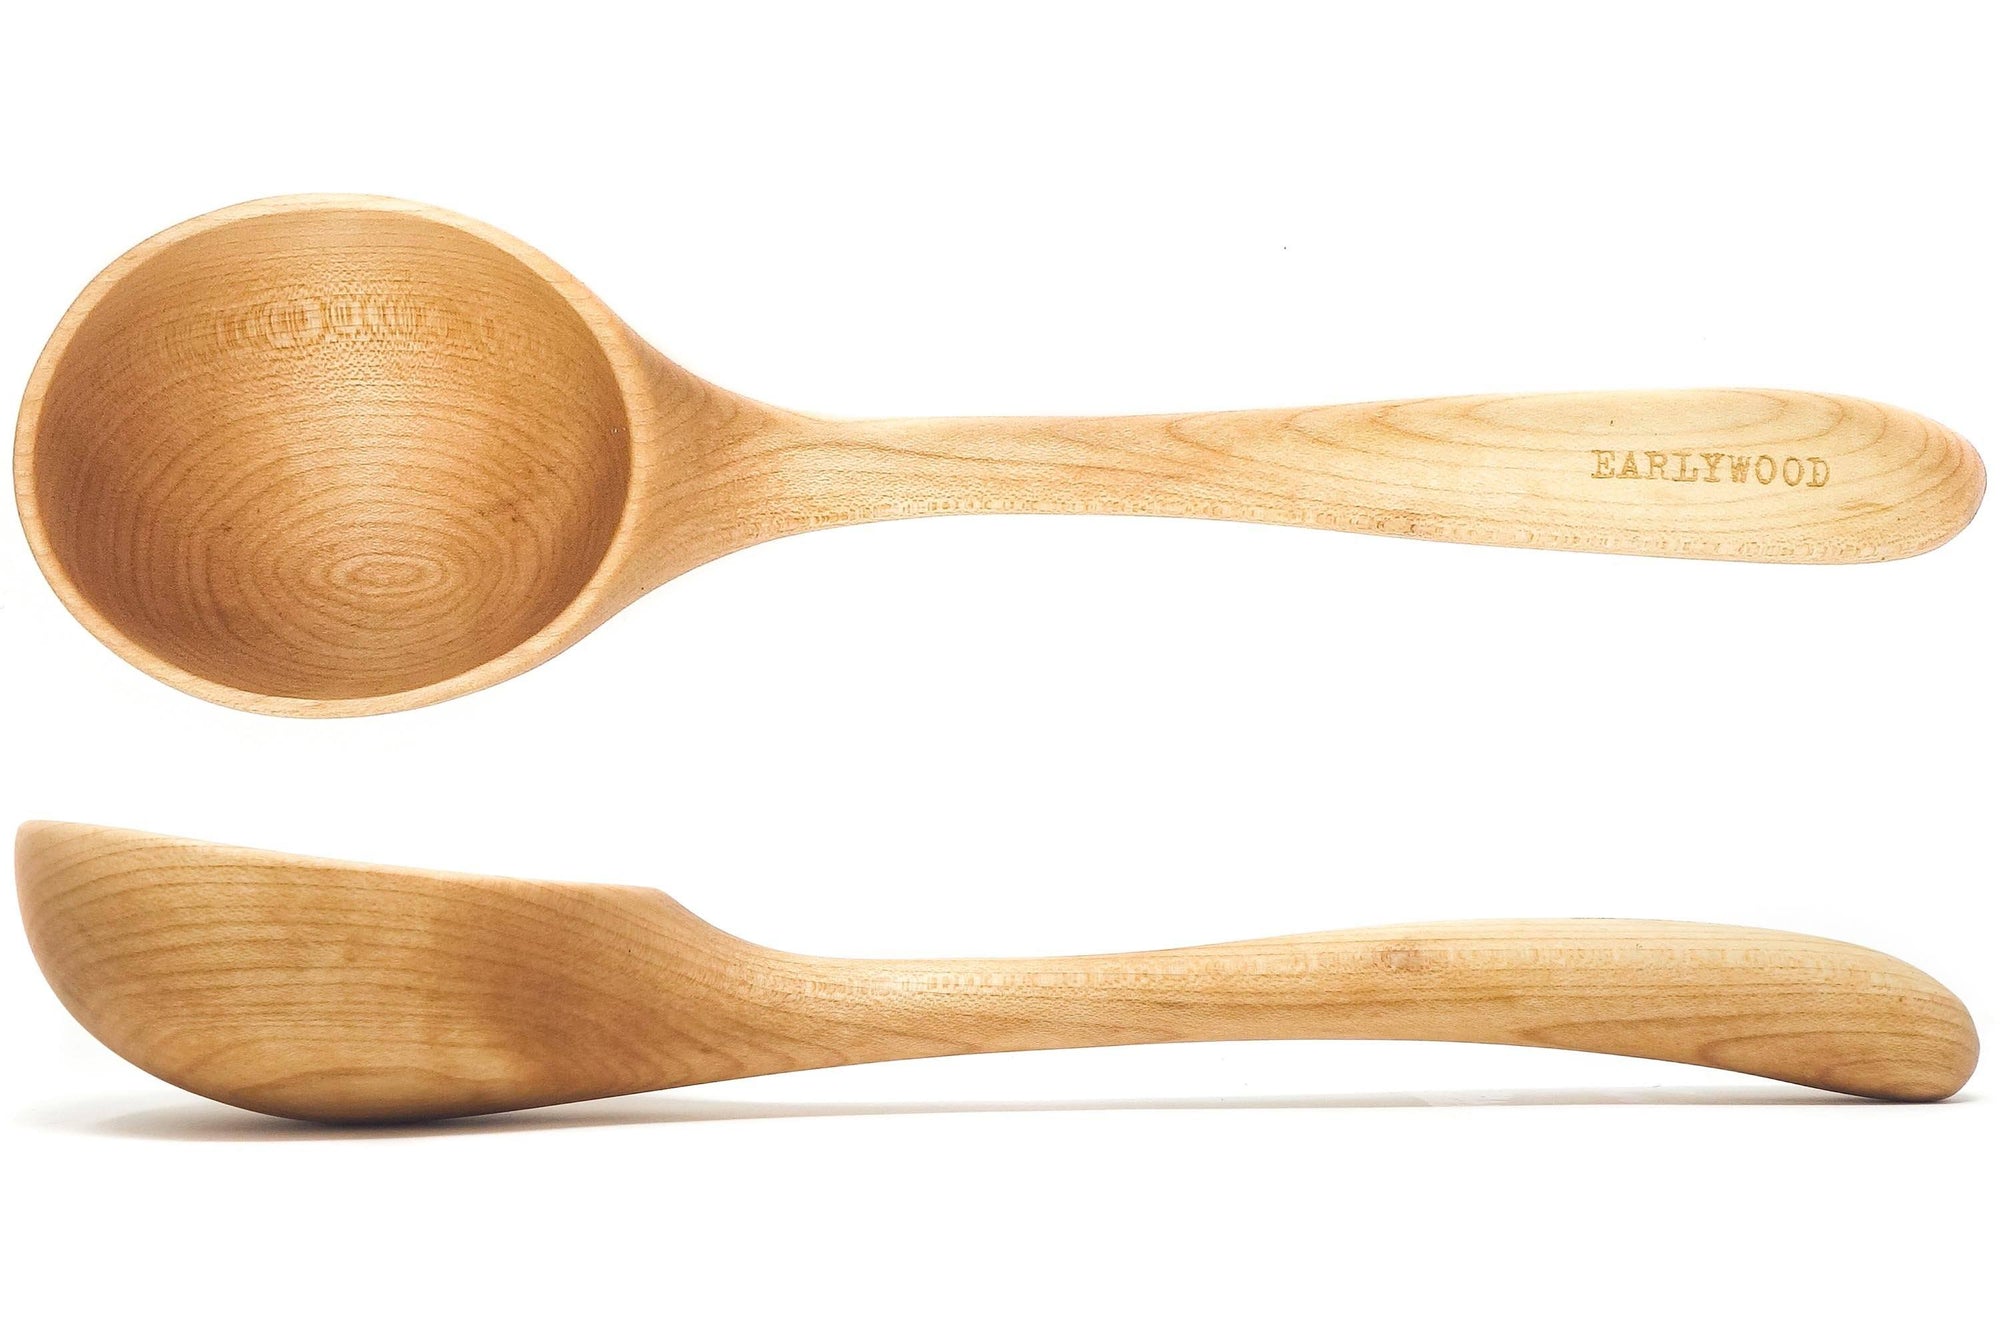 soup ladle - hard maple by Earlywood